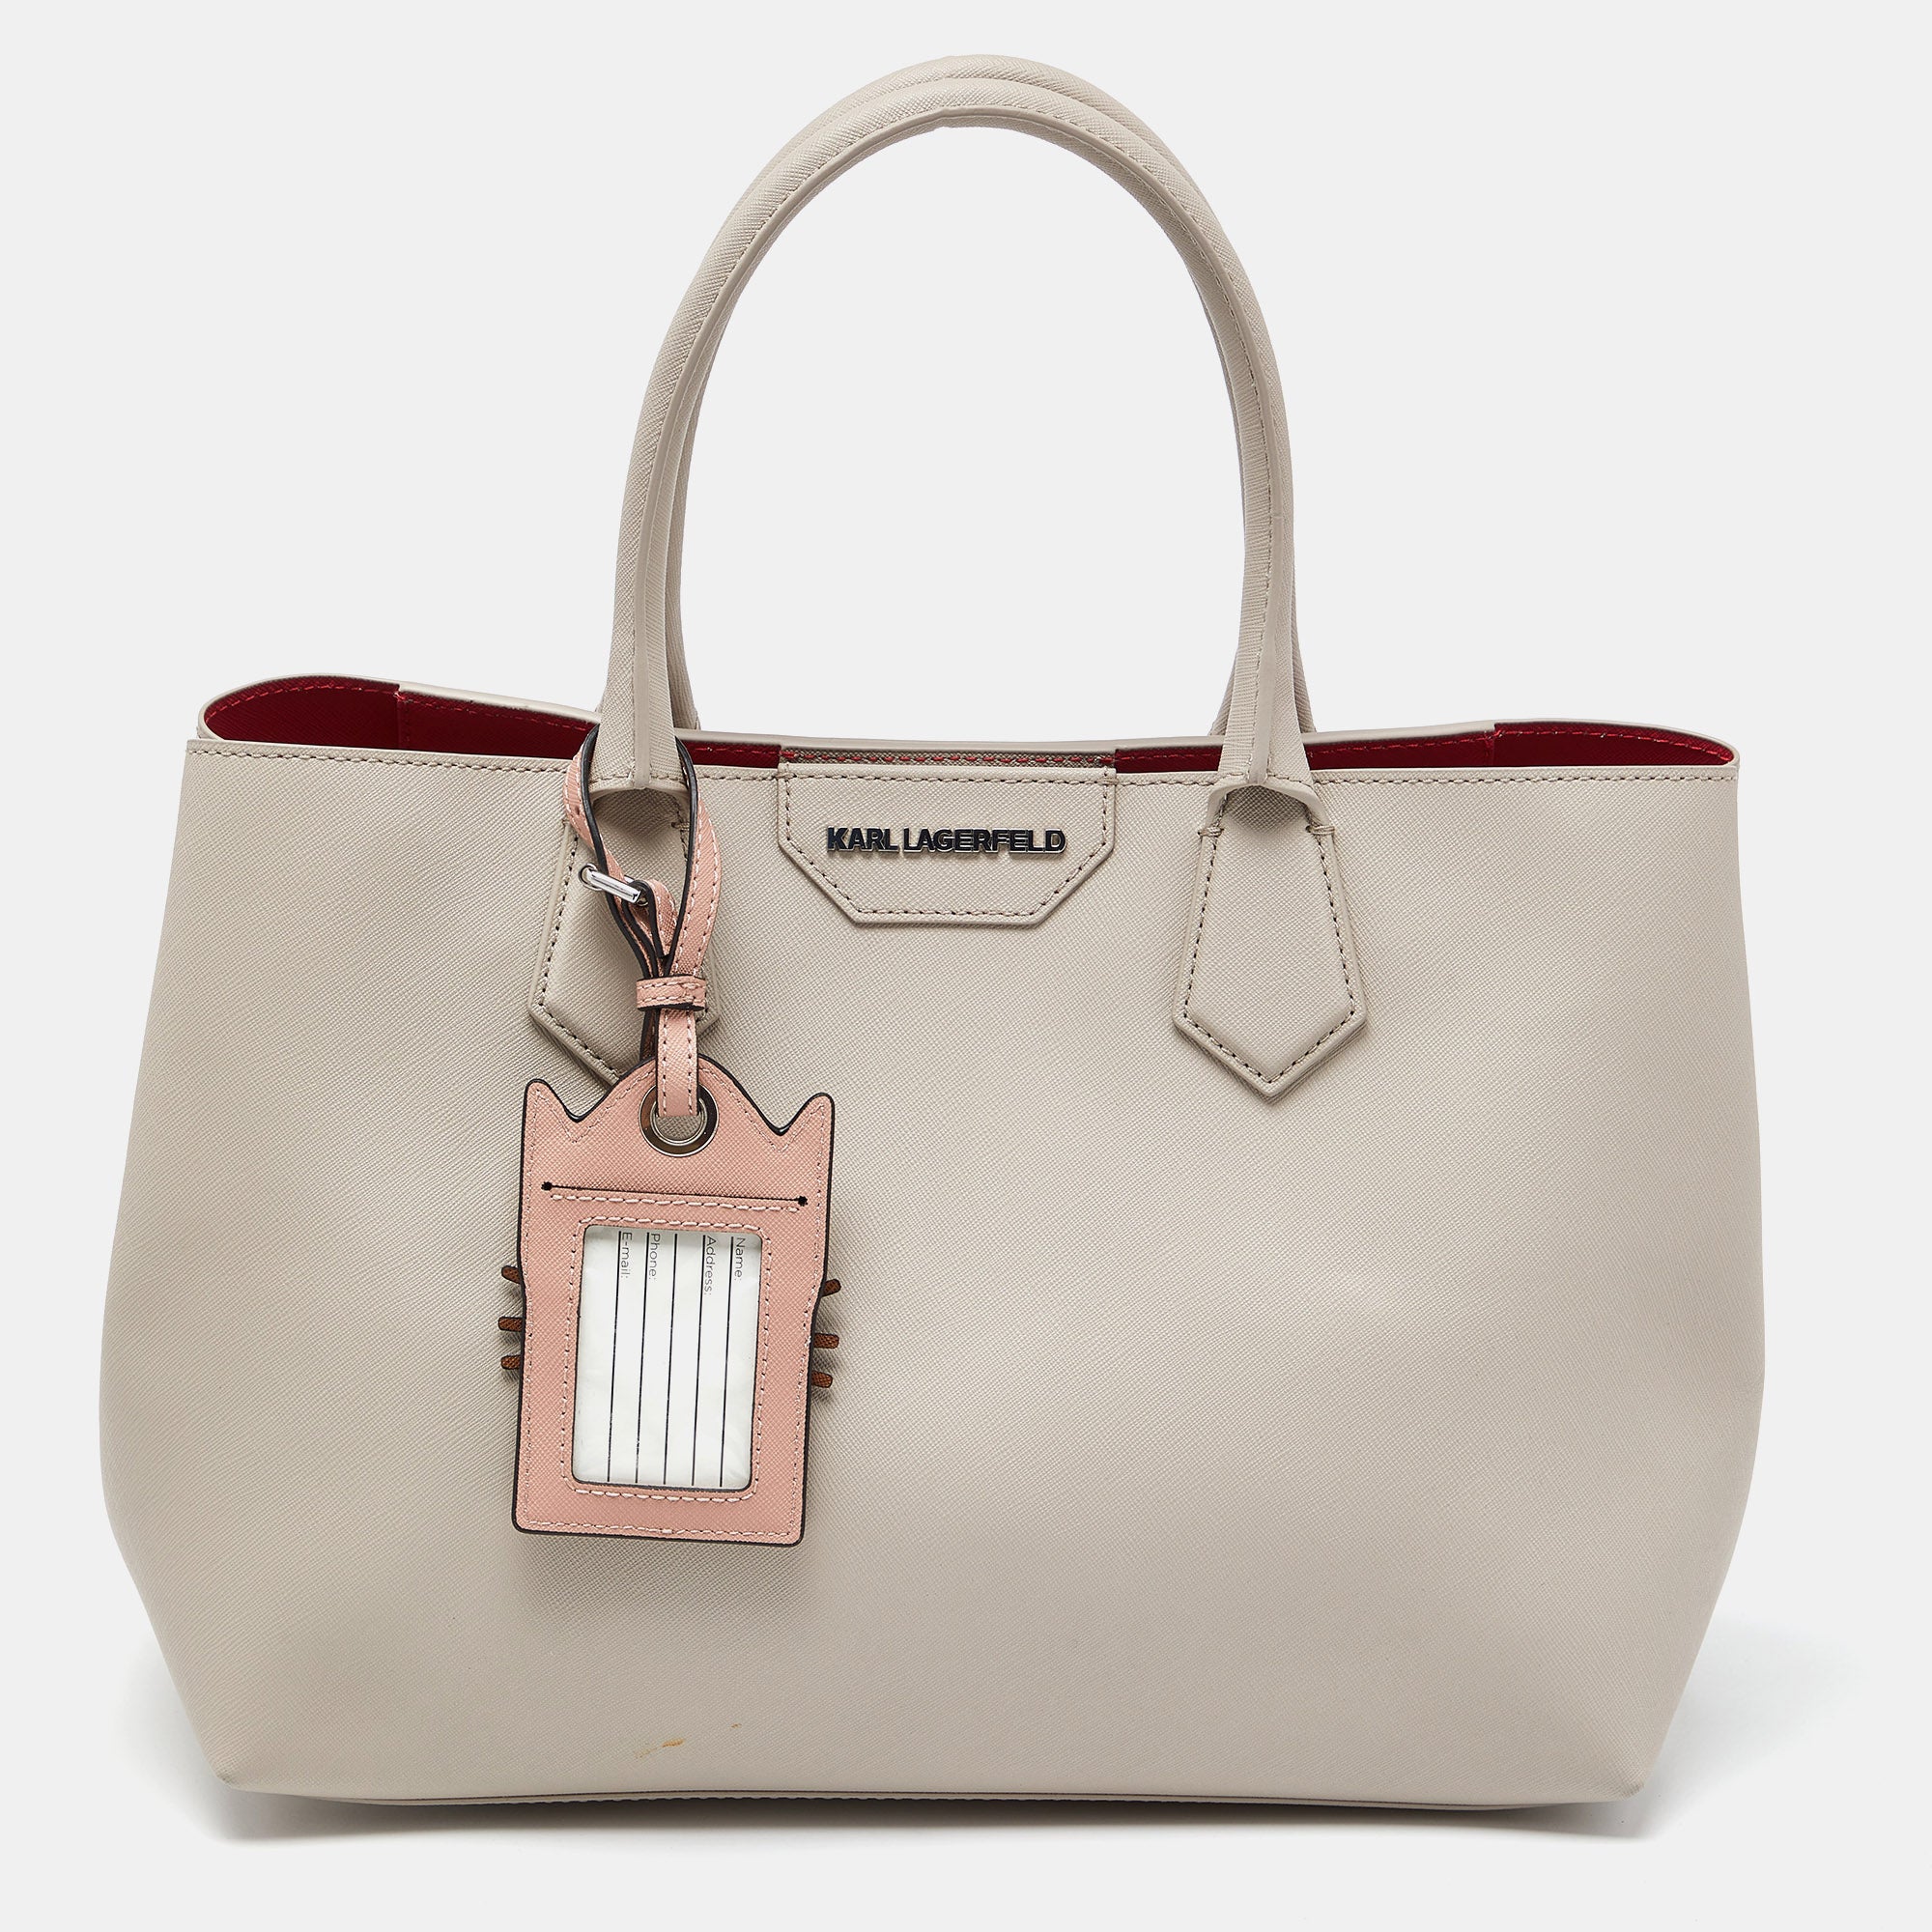 Grey Textured Leather Tote